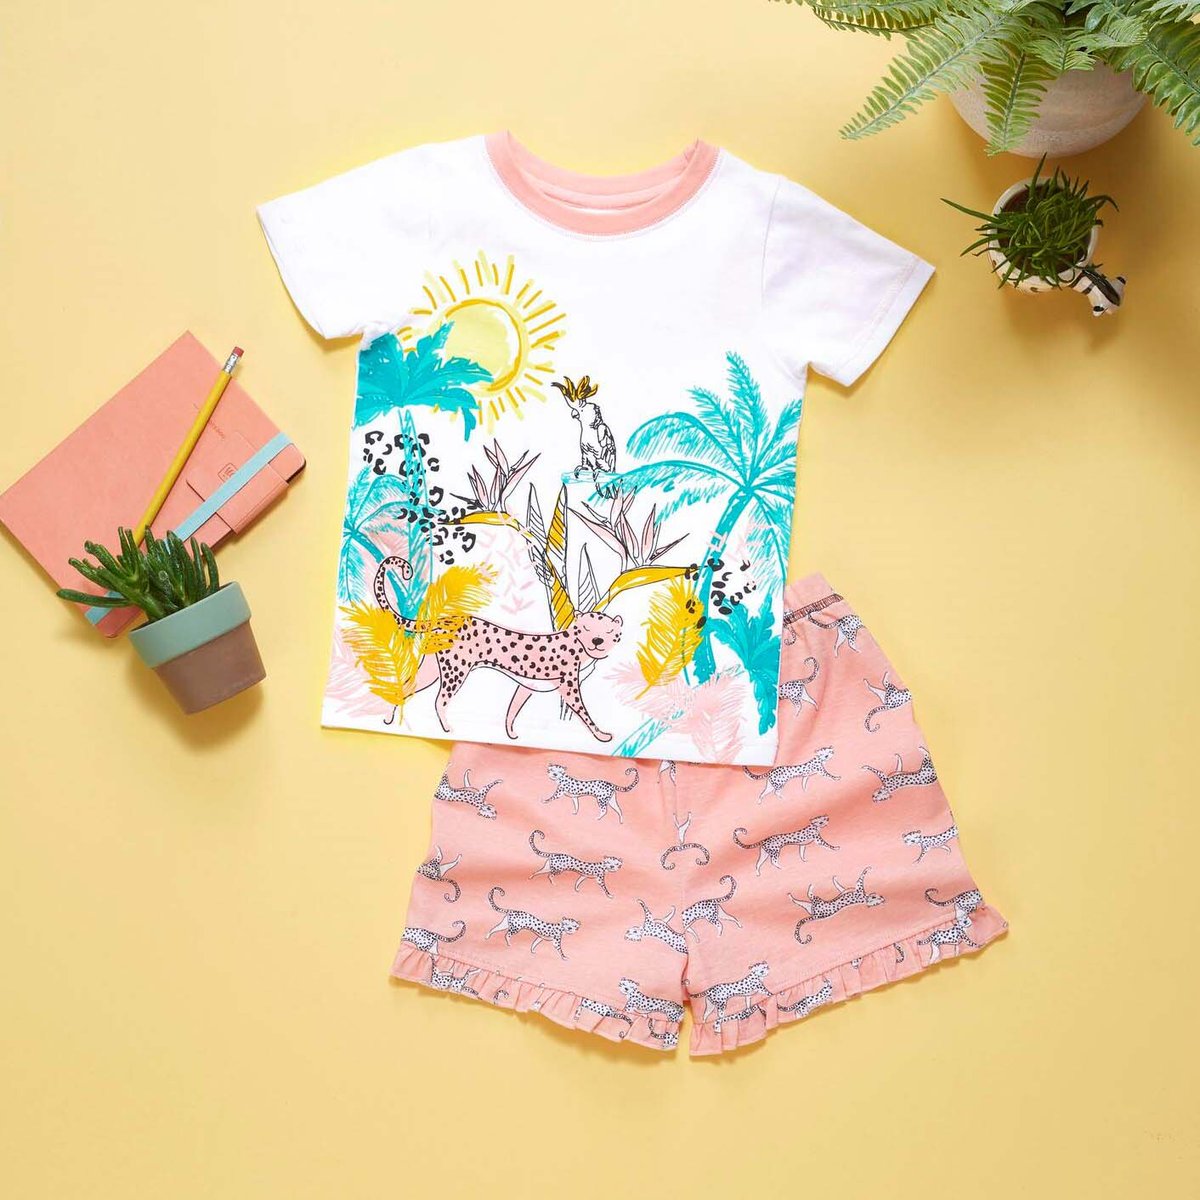 From ages 12 months all the way to 8 years, you can get your hands on these super fun Jungle print PJ's for your kids. 🌴🐆 100% cotton and excellent quality too! Check out my online store to pick up a set before they sell out. 🐯🦁
wu.to/7slQvv
#KidsPyjamas #Avon